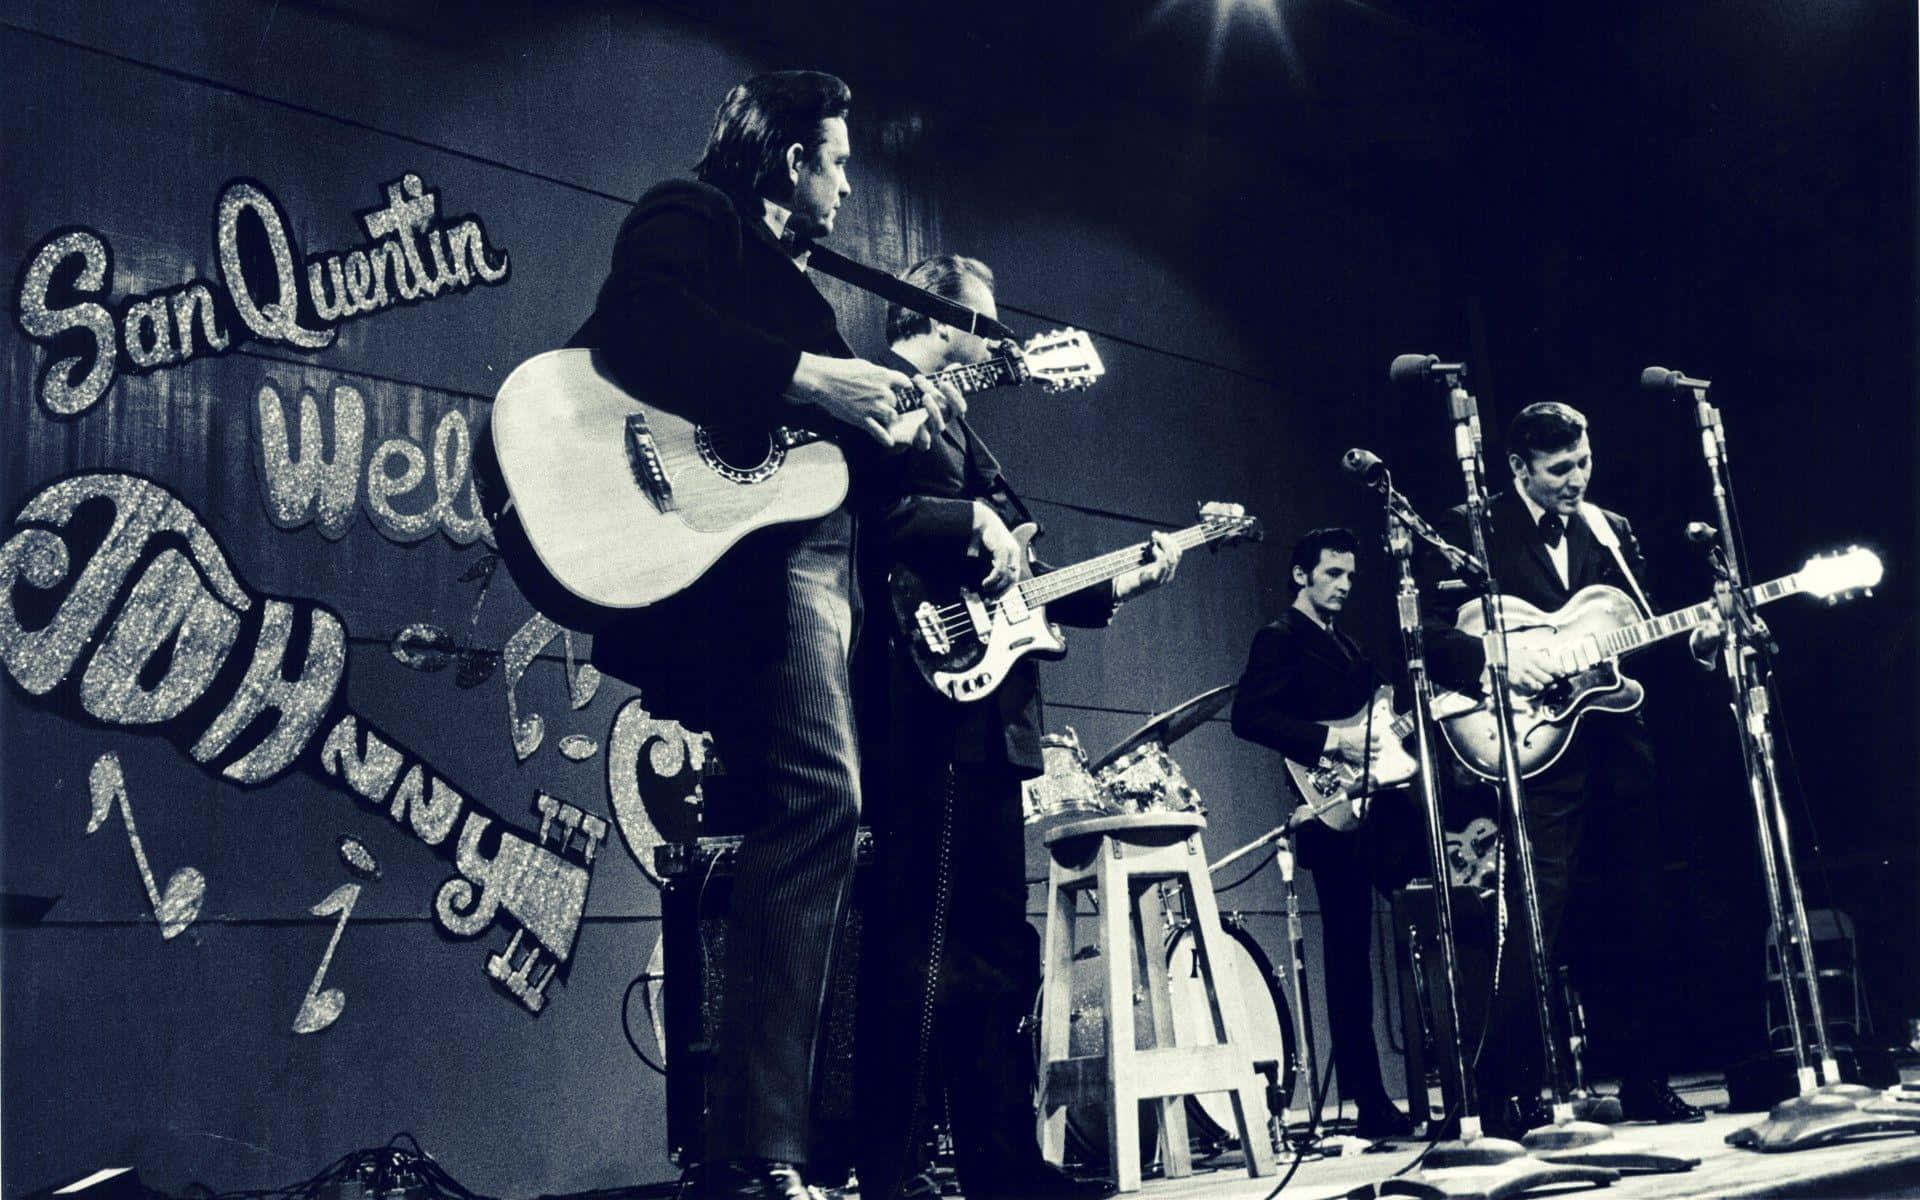 The man in black, country and folk music legend, Johnny Cash